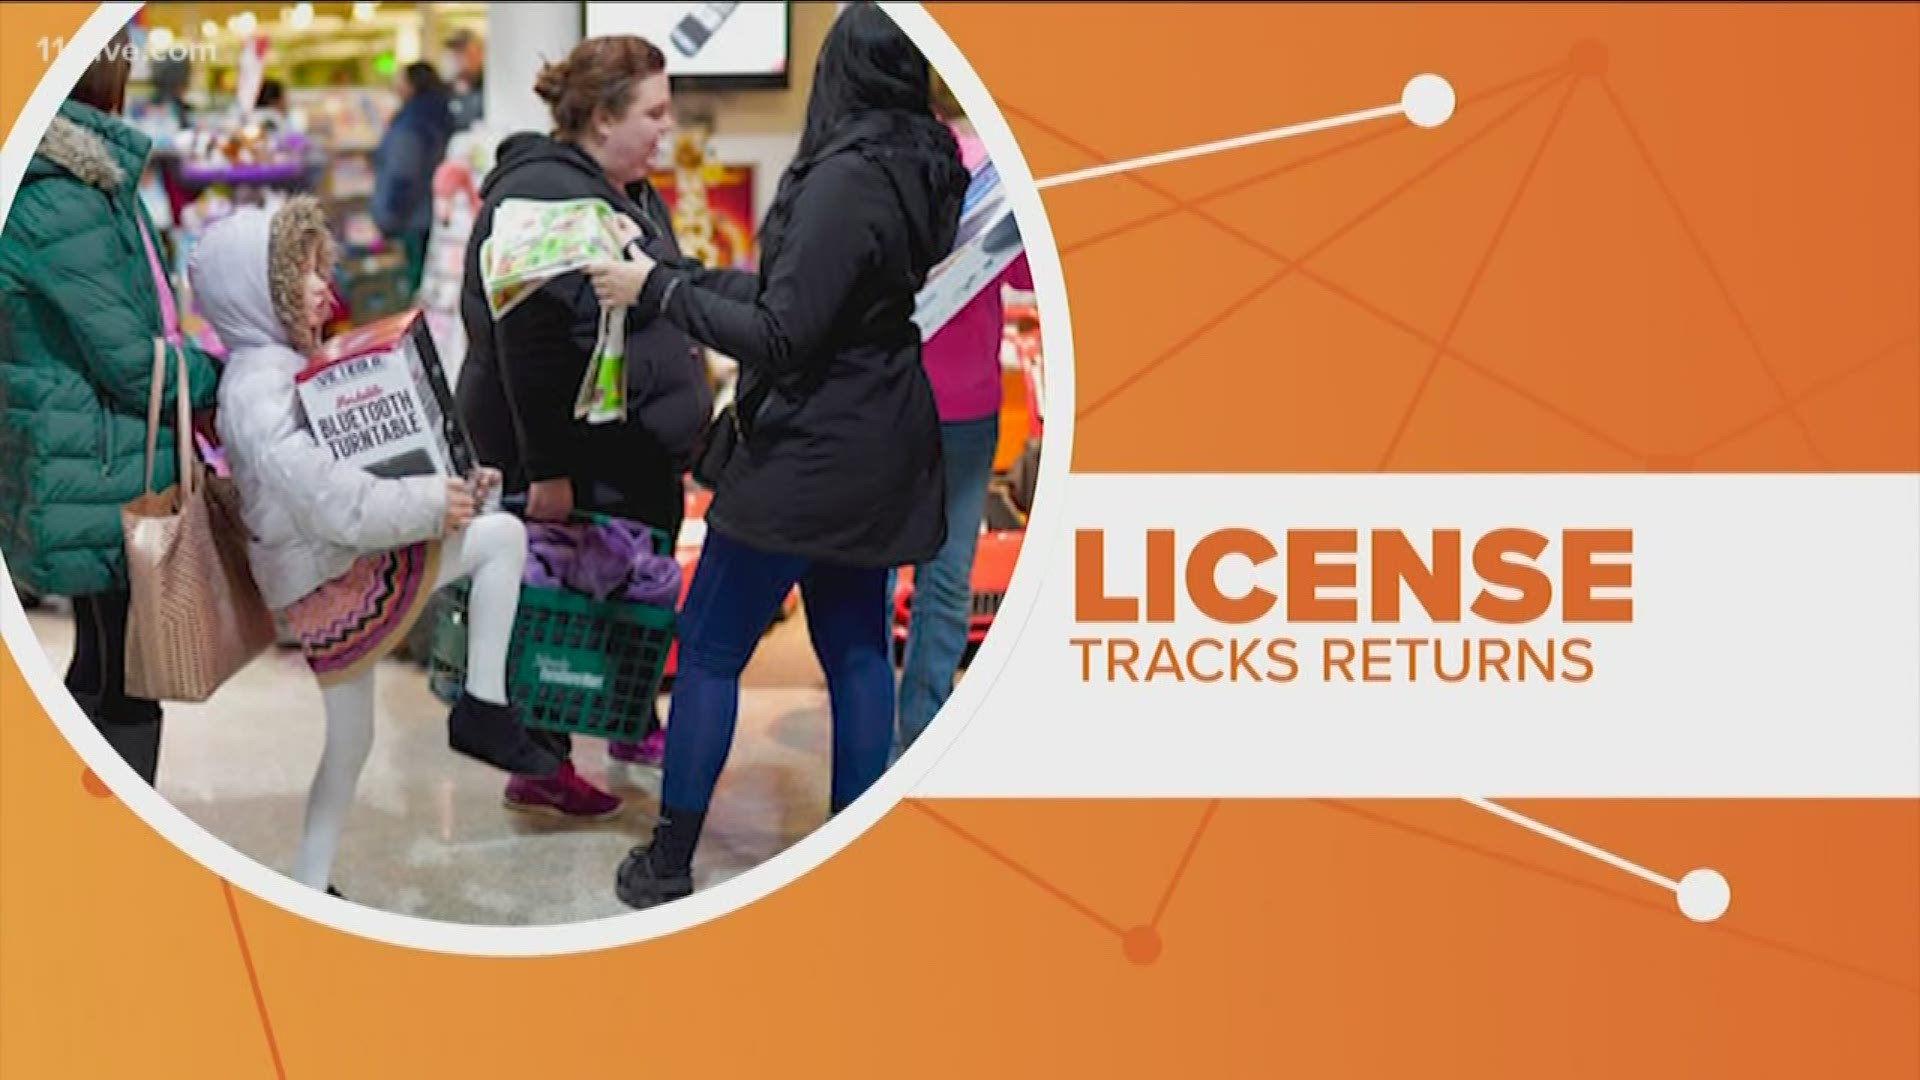 Stores use a national tracking system to weed out serial returners.